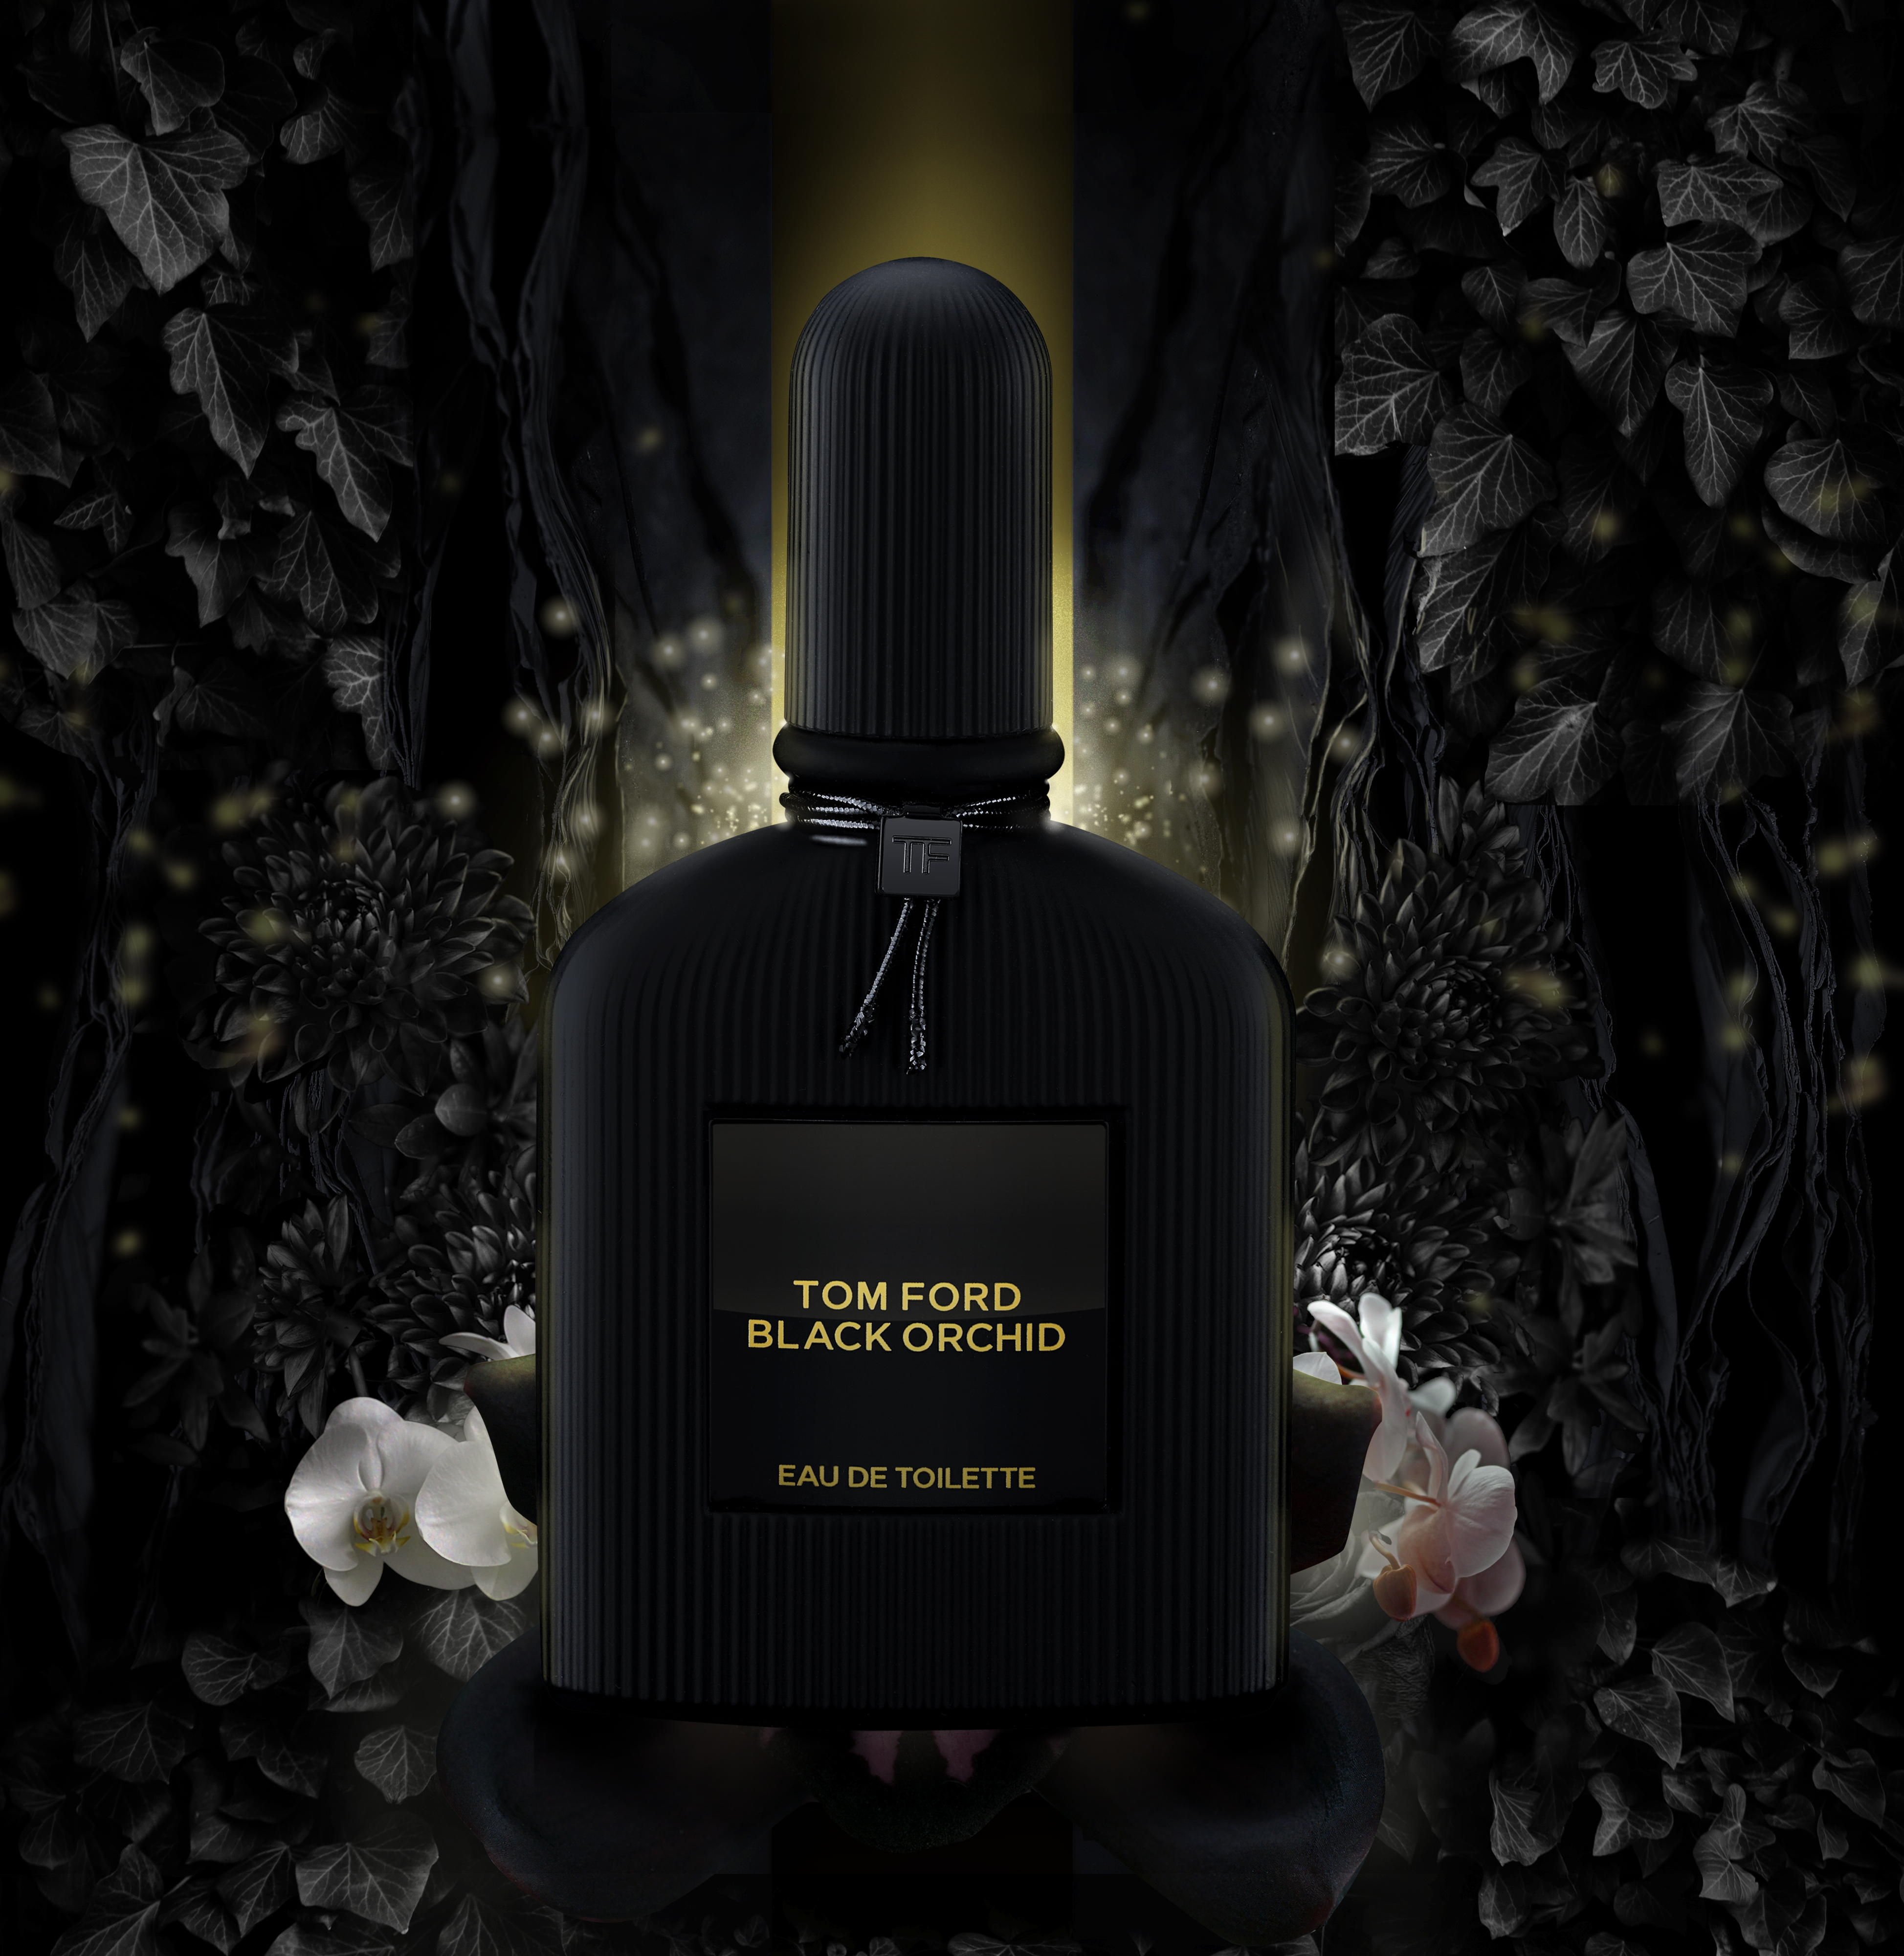 tom ford ad, tom ford black orchid ad, tom ford photography, product photography, product ad